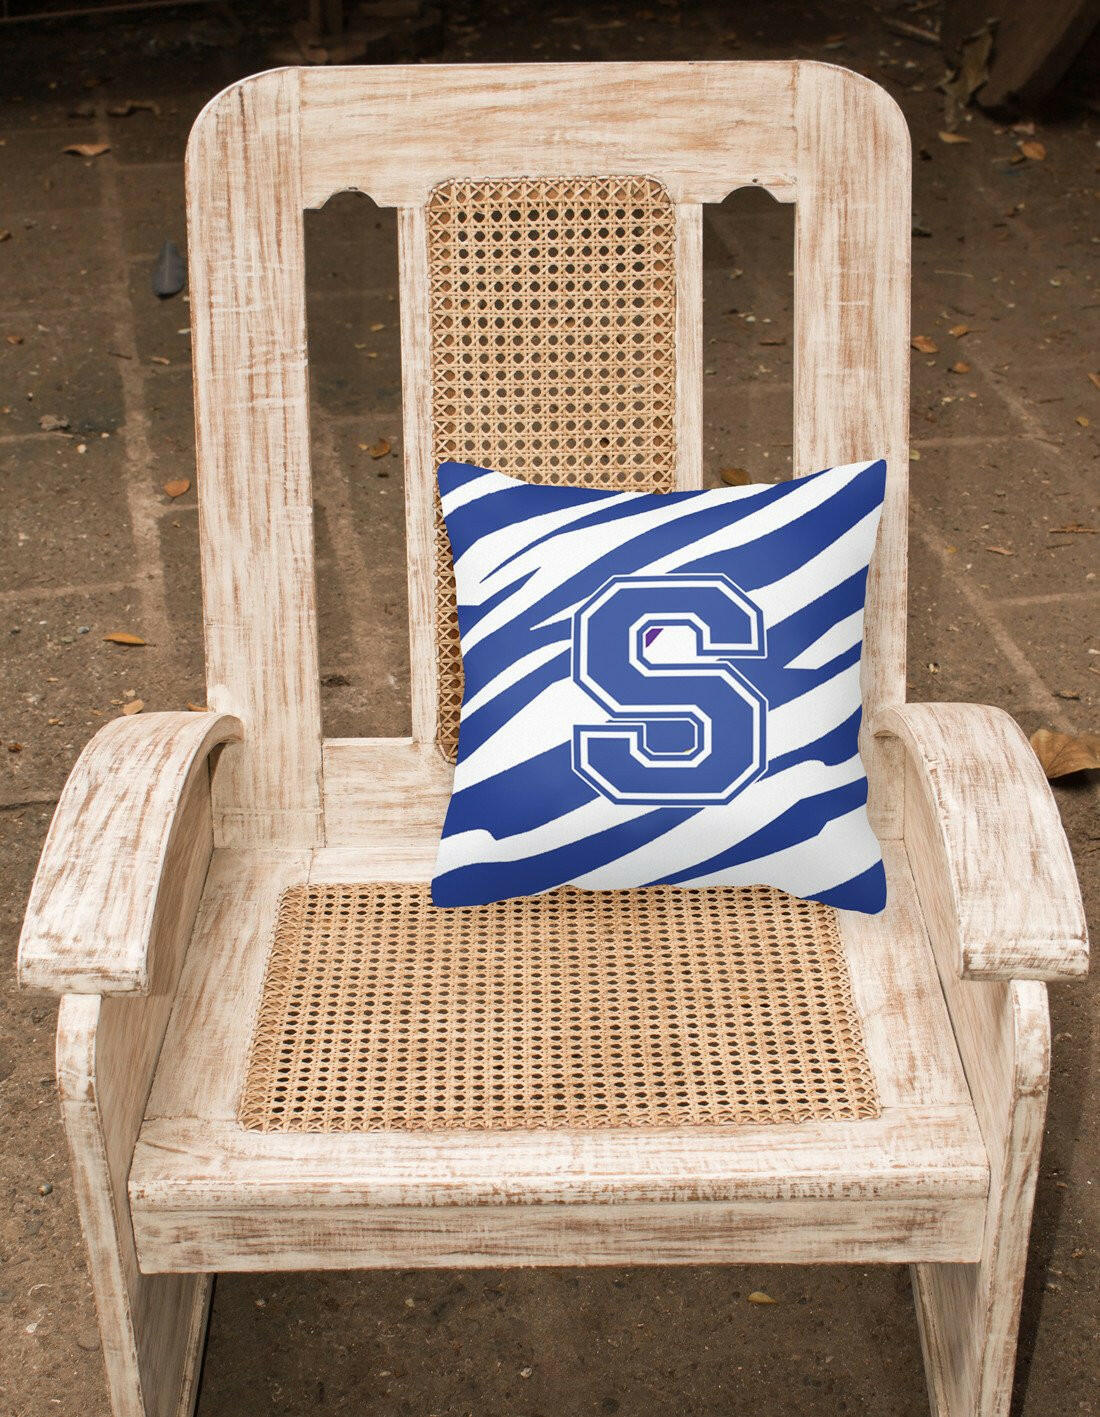 Monogram Initial S Tiger Stripe Blue and White Decorative Canvas Fabric Pillow - the-store.com